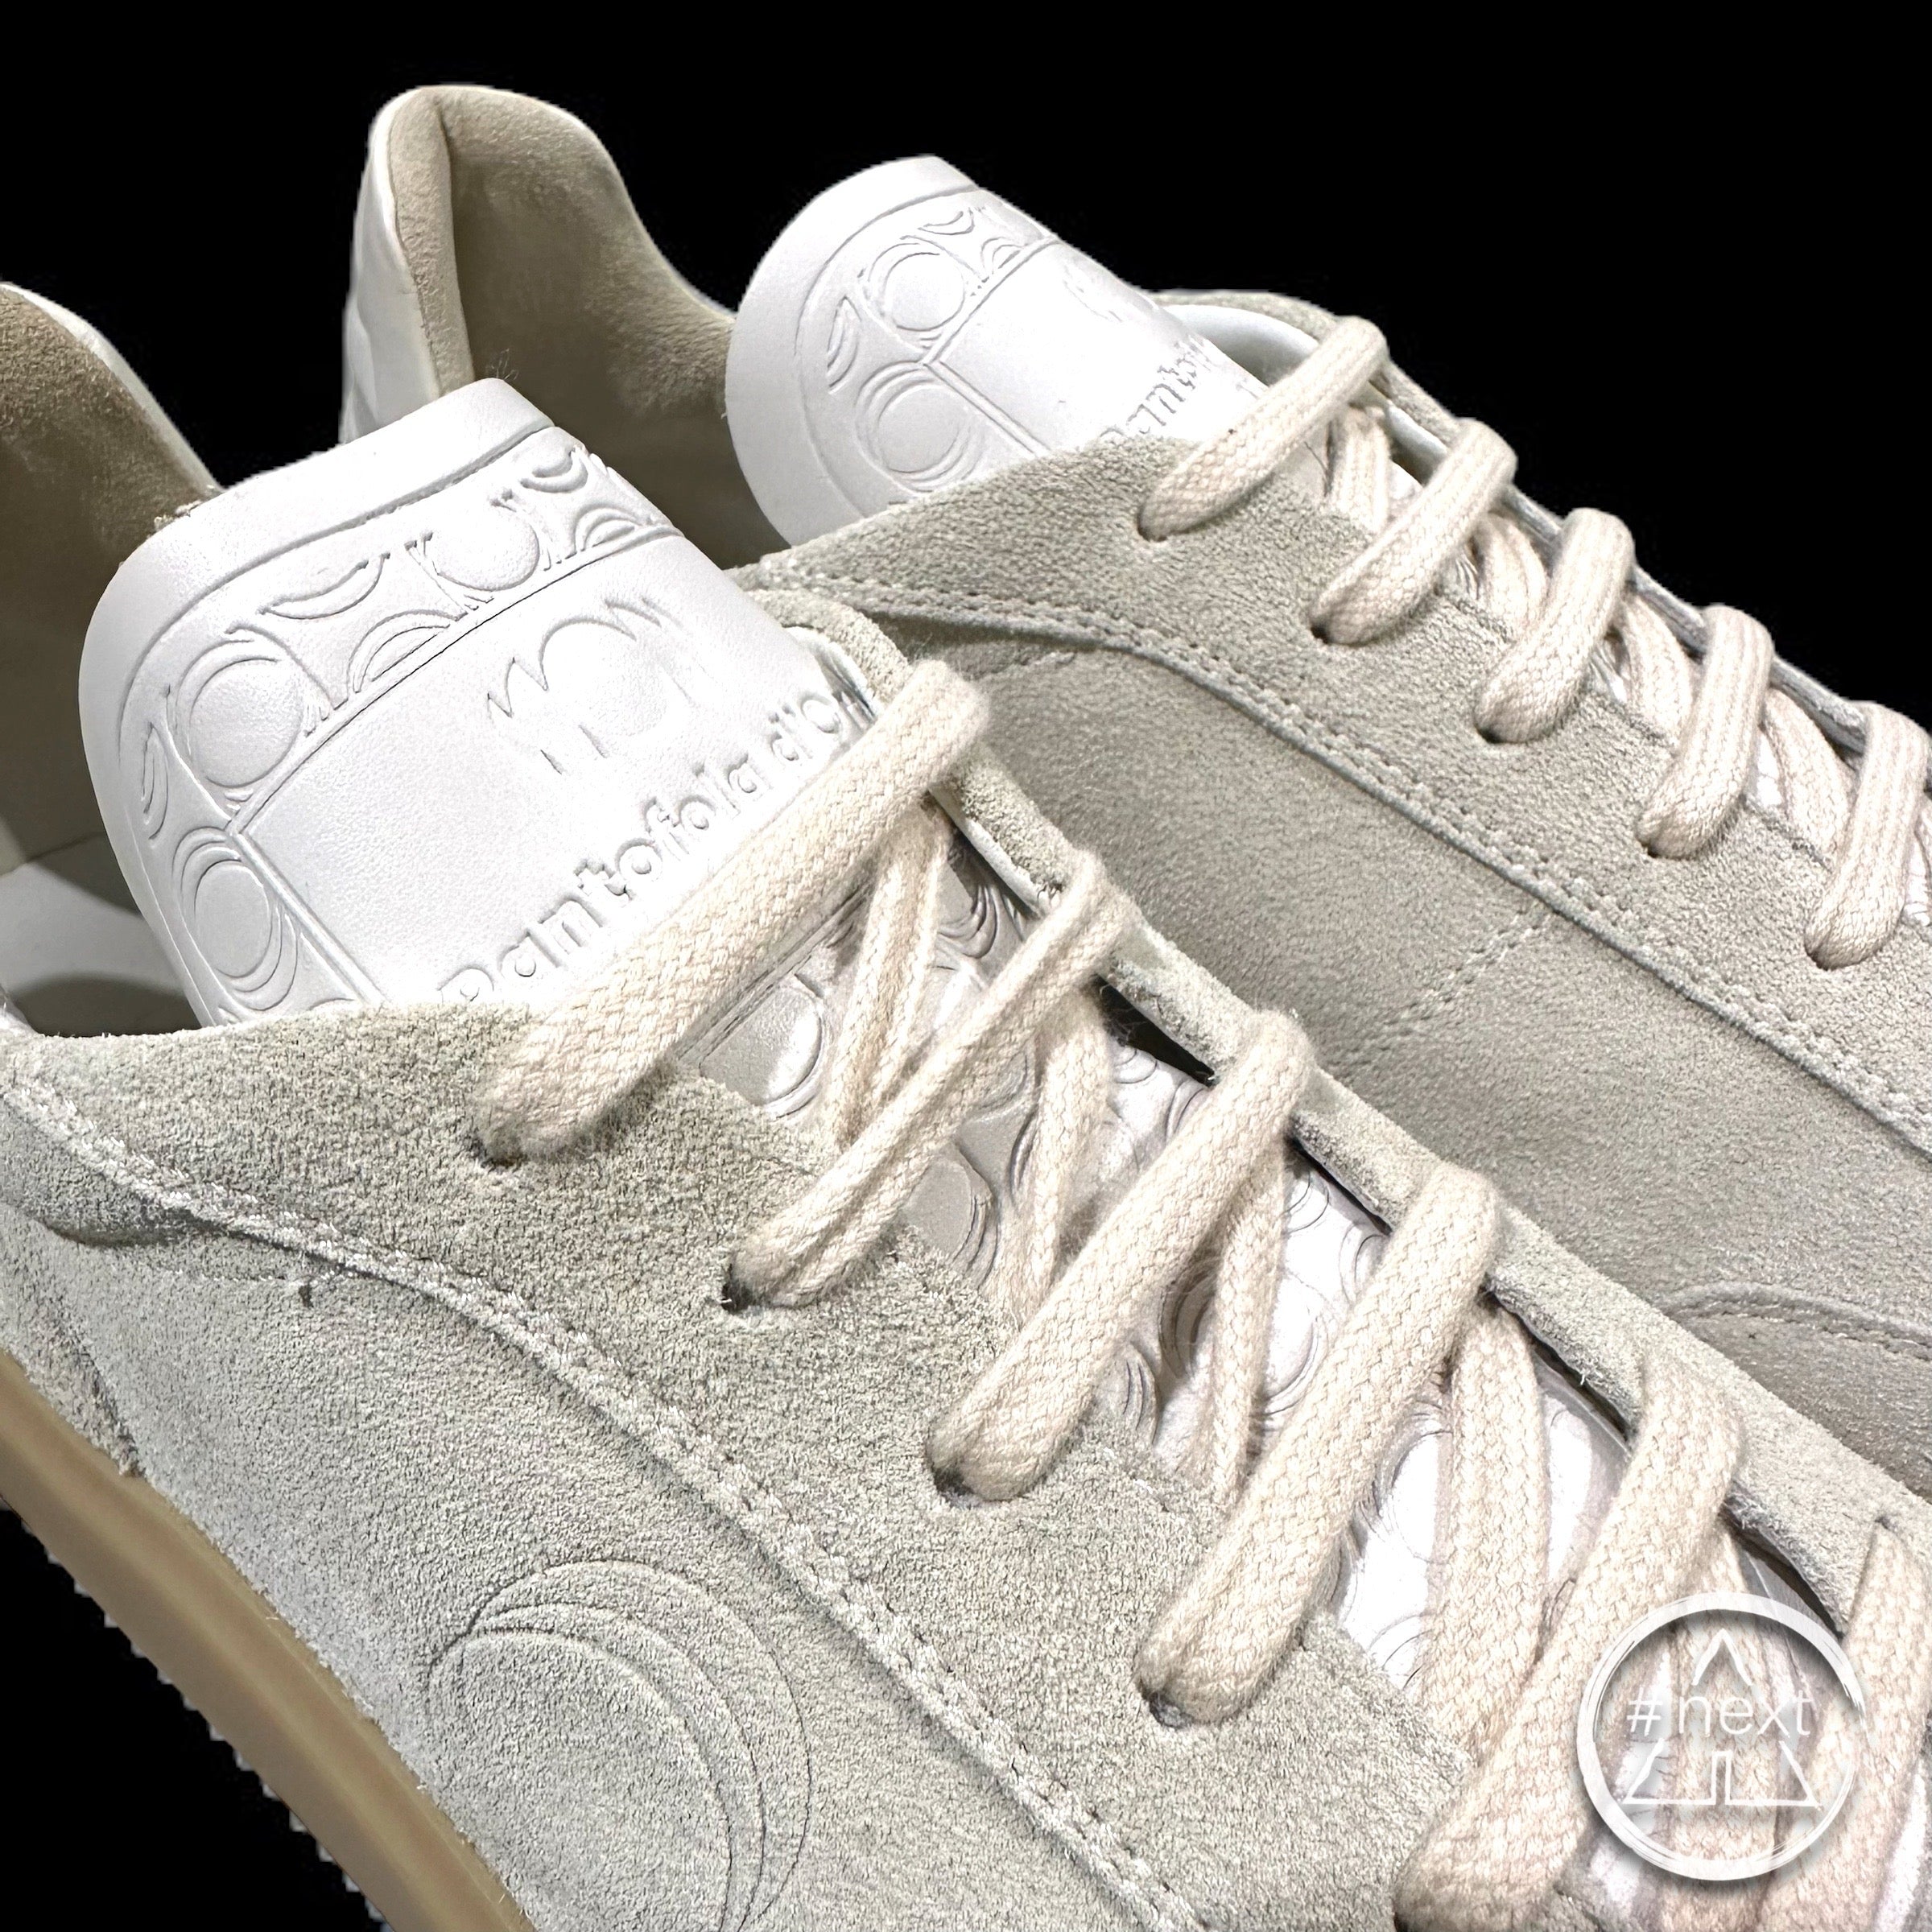 #TAKEBACK - Pantofola D'Oro - Sneakers League - Mastice off white. - ANDY #NEXT